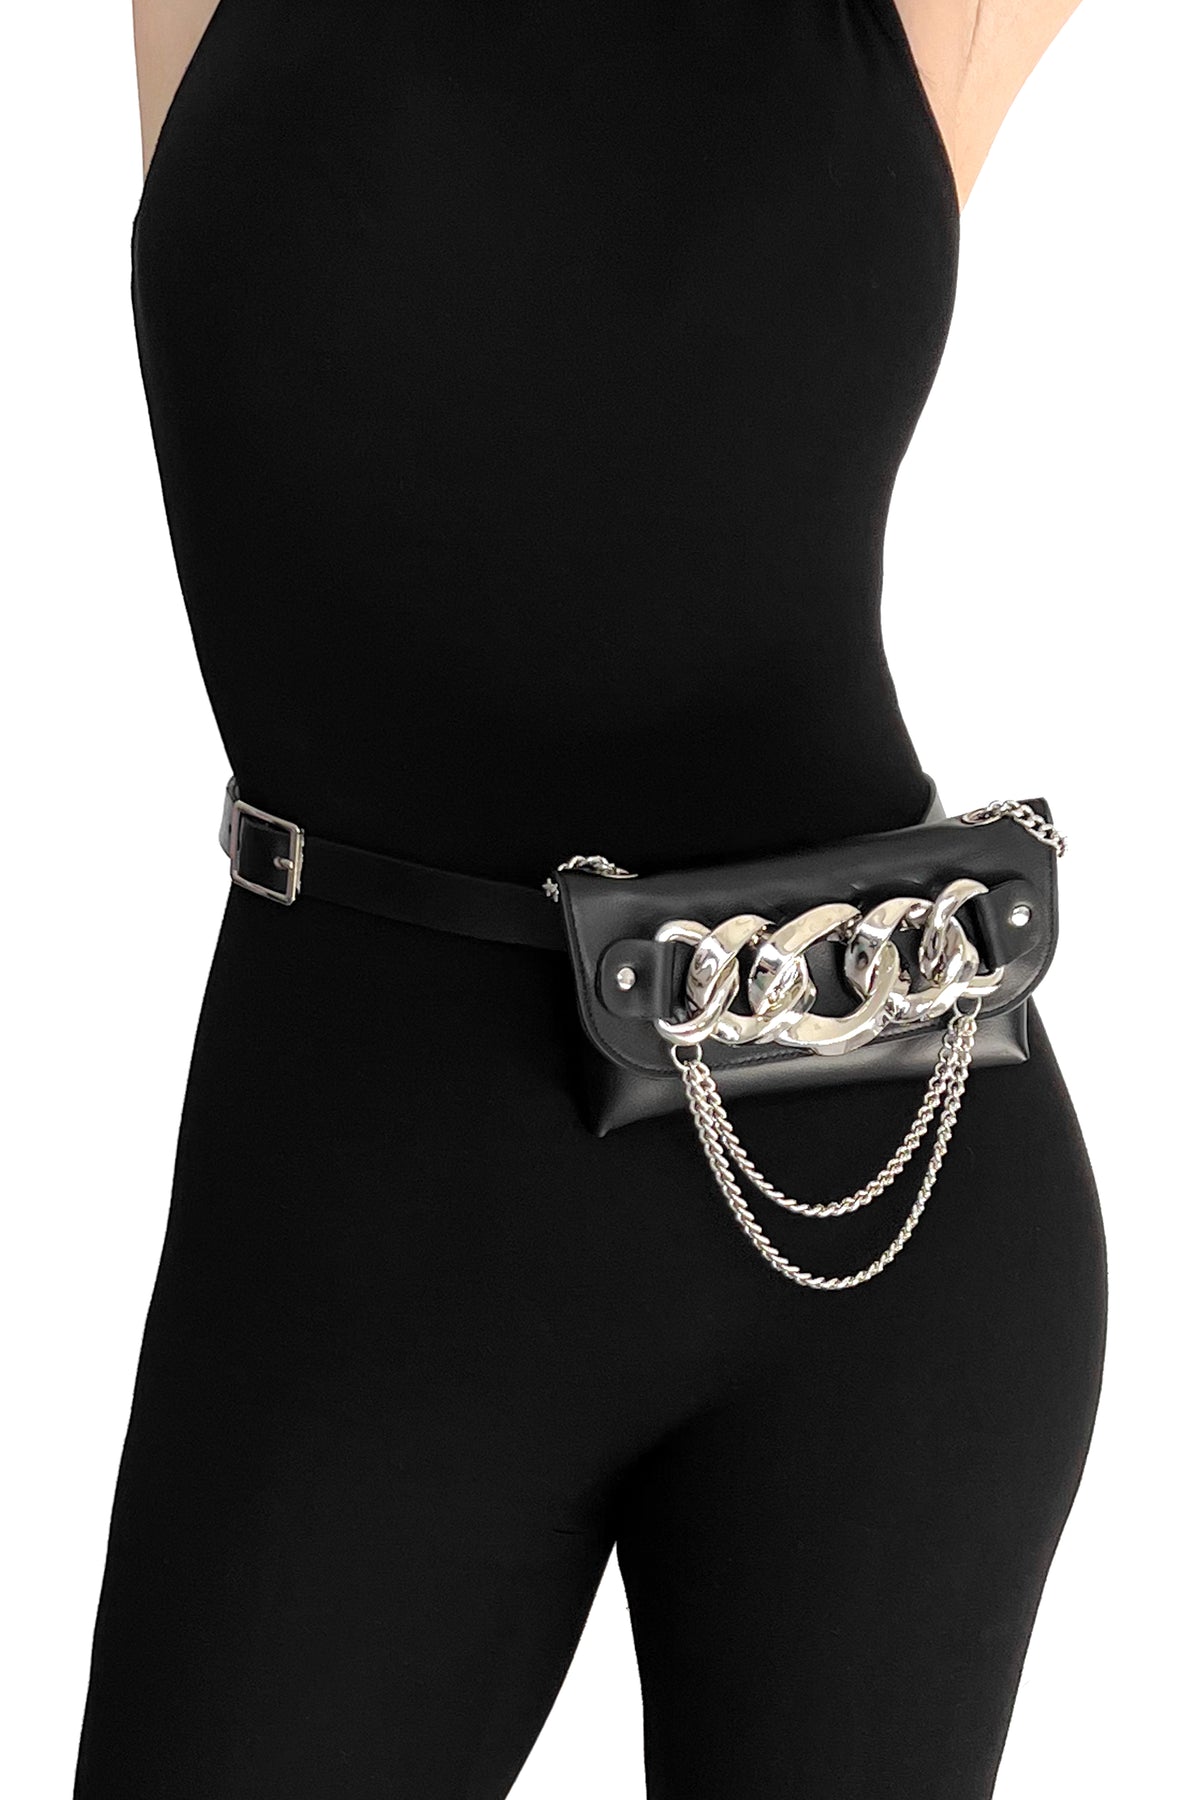 black faux leather bag with chunky chain front detail, tiered chain detail attached to a detachable belt